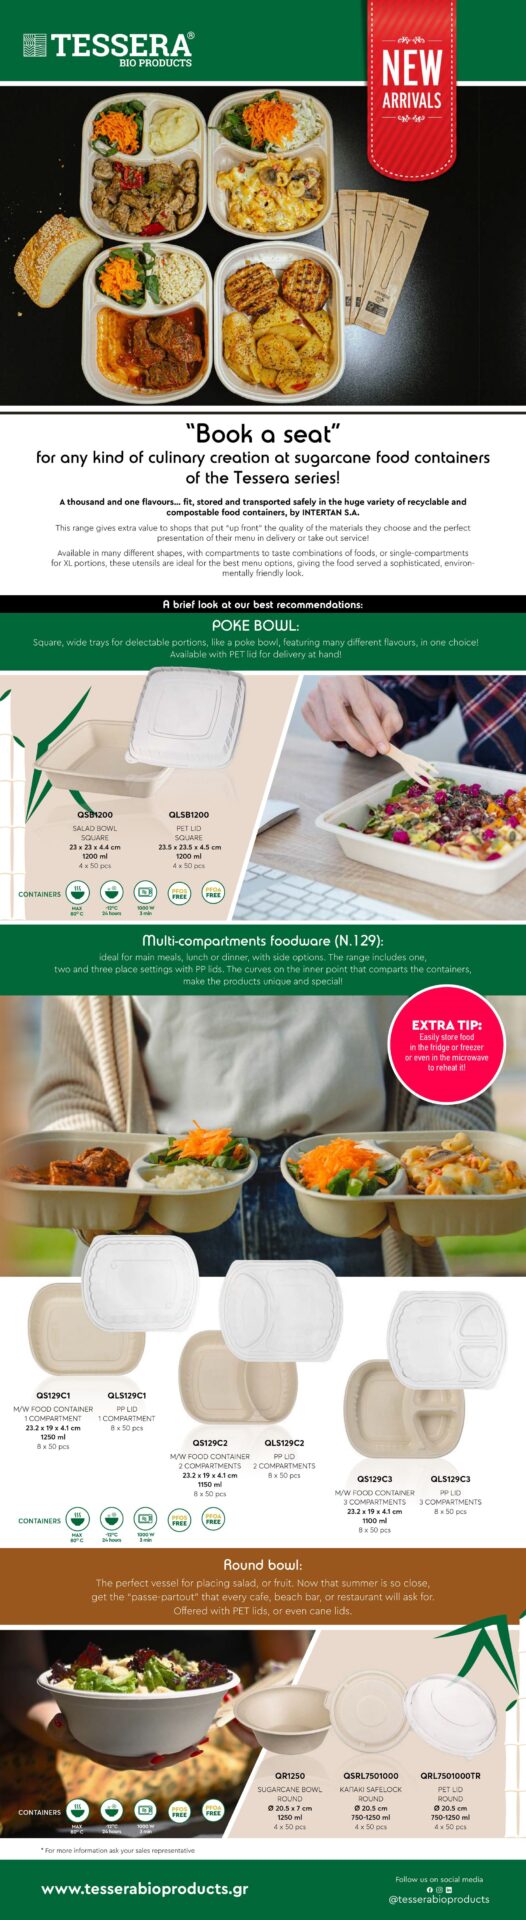 Unique serving suggestions with Sugarcane Food Containers Newsletter | Intertan S.A.